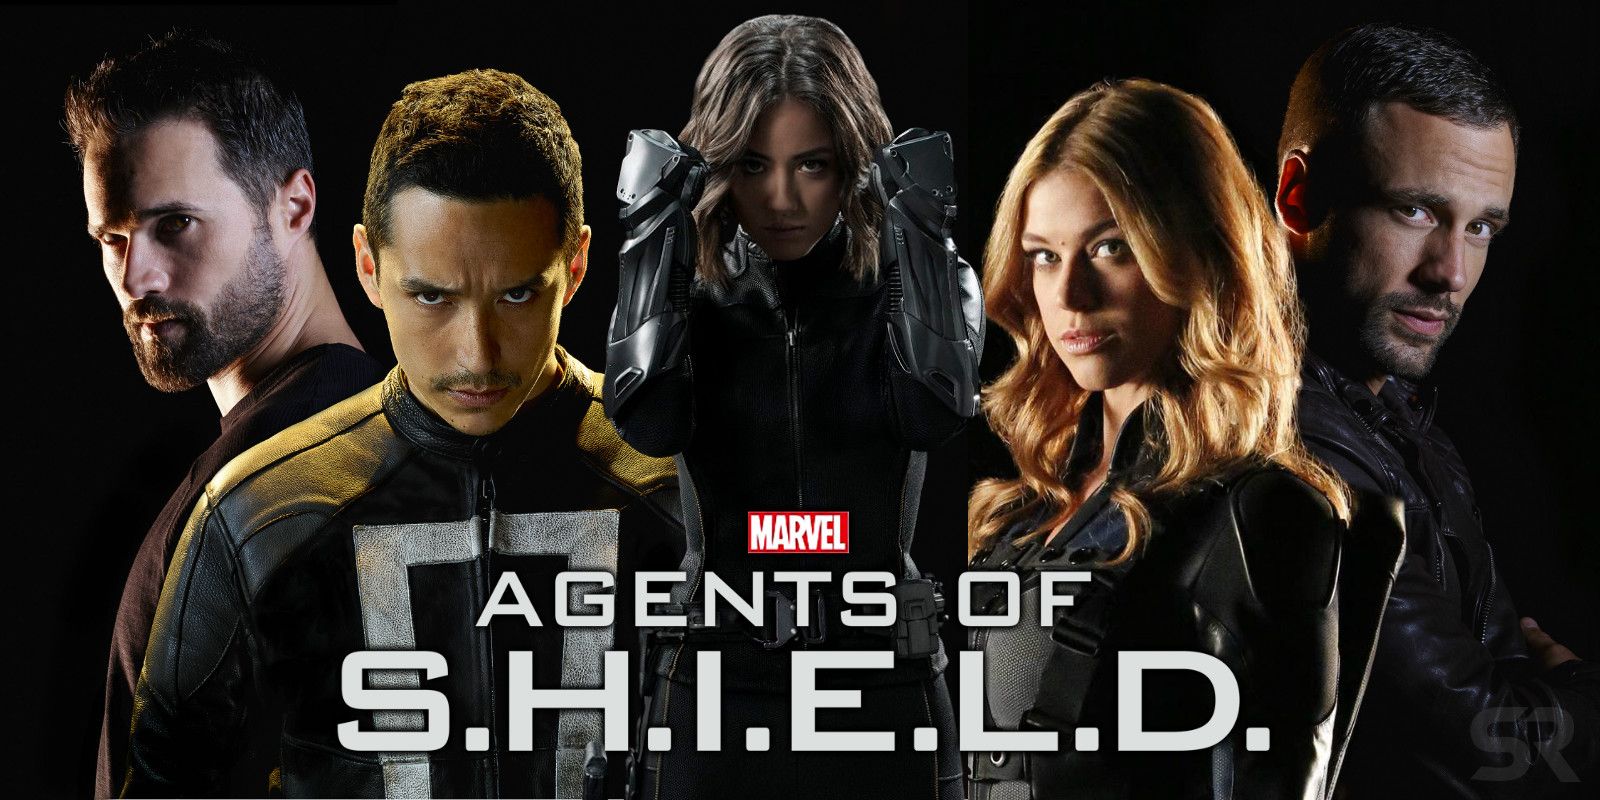  marvels agent of shield